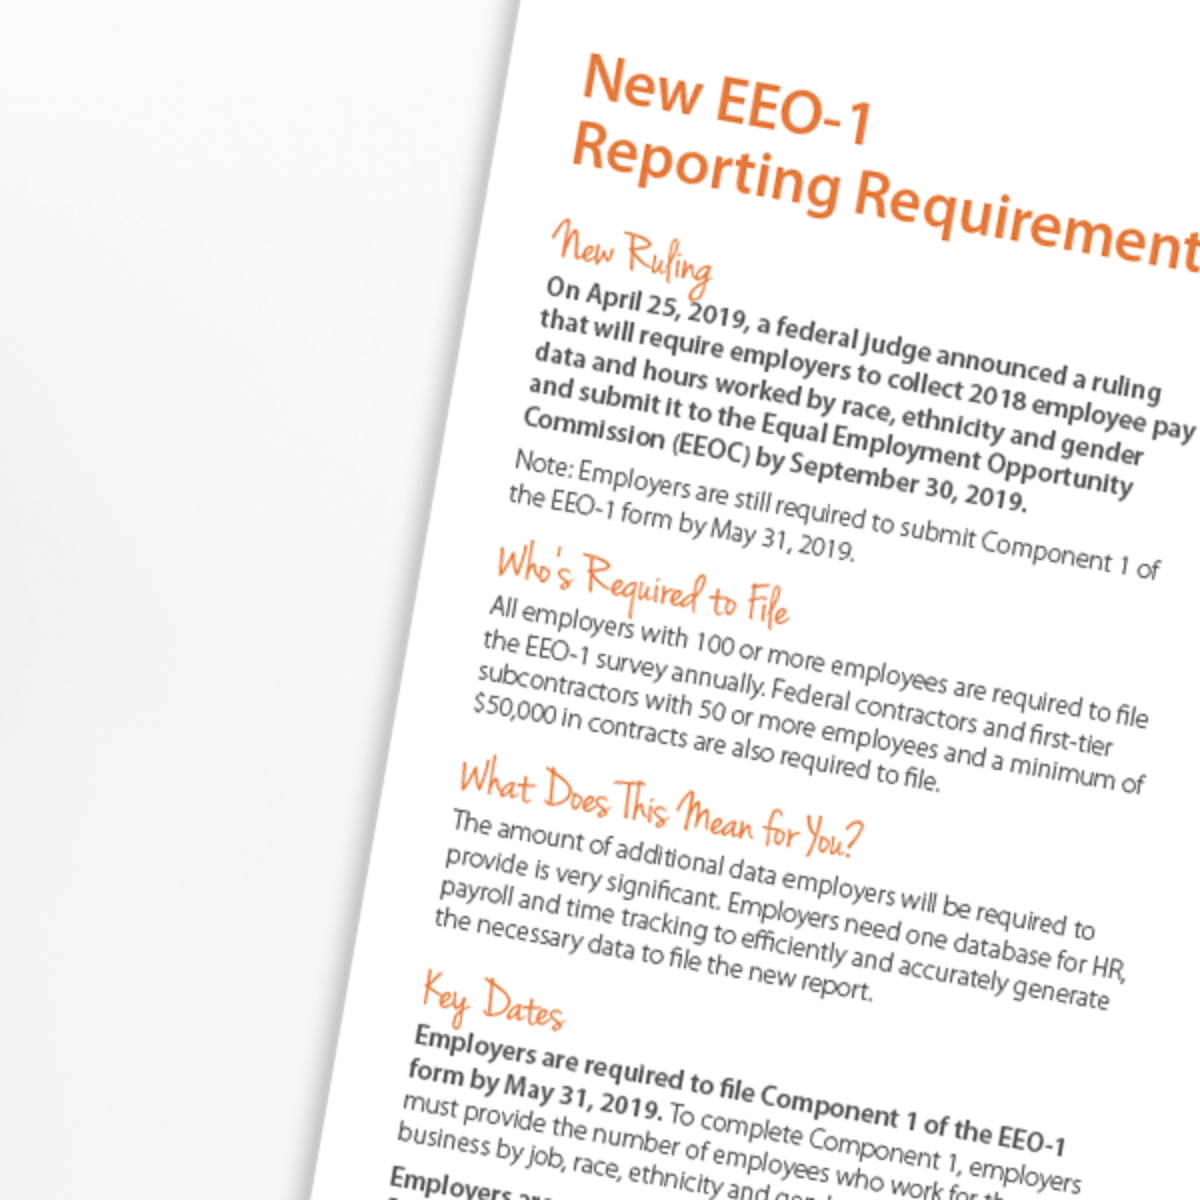 Essential EEOC Guide to New EEO1 Reporting Paycor